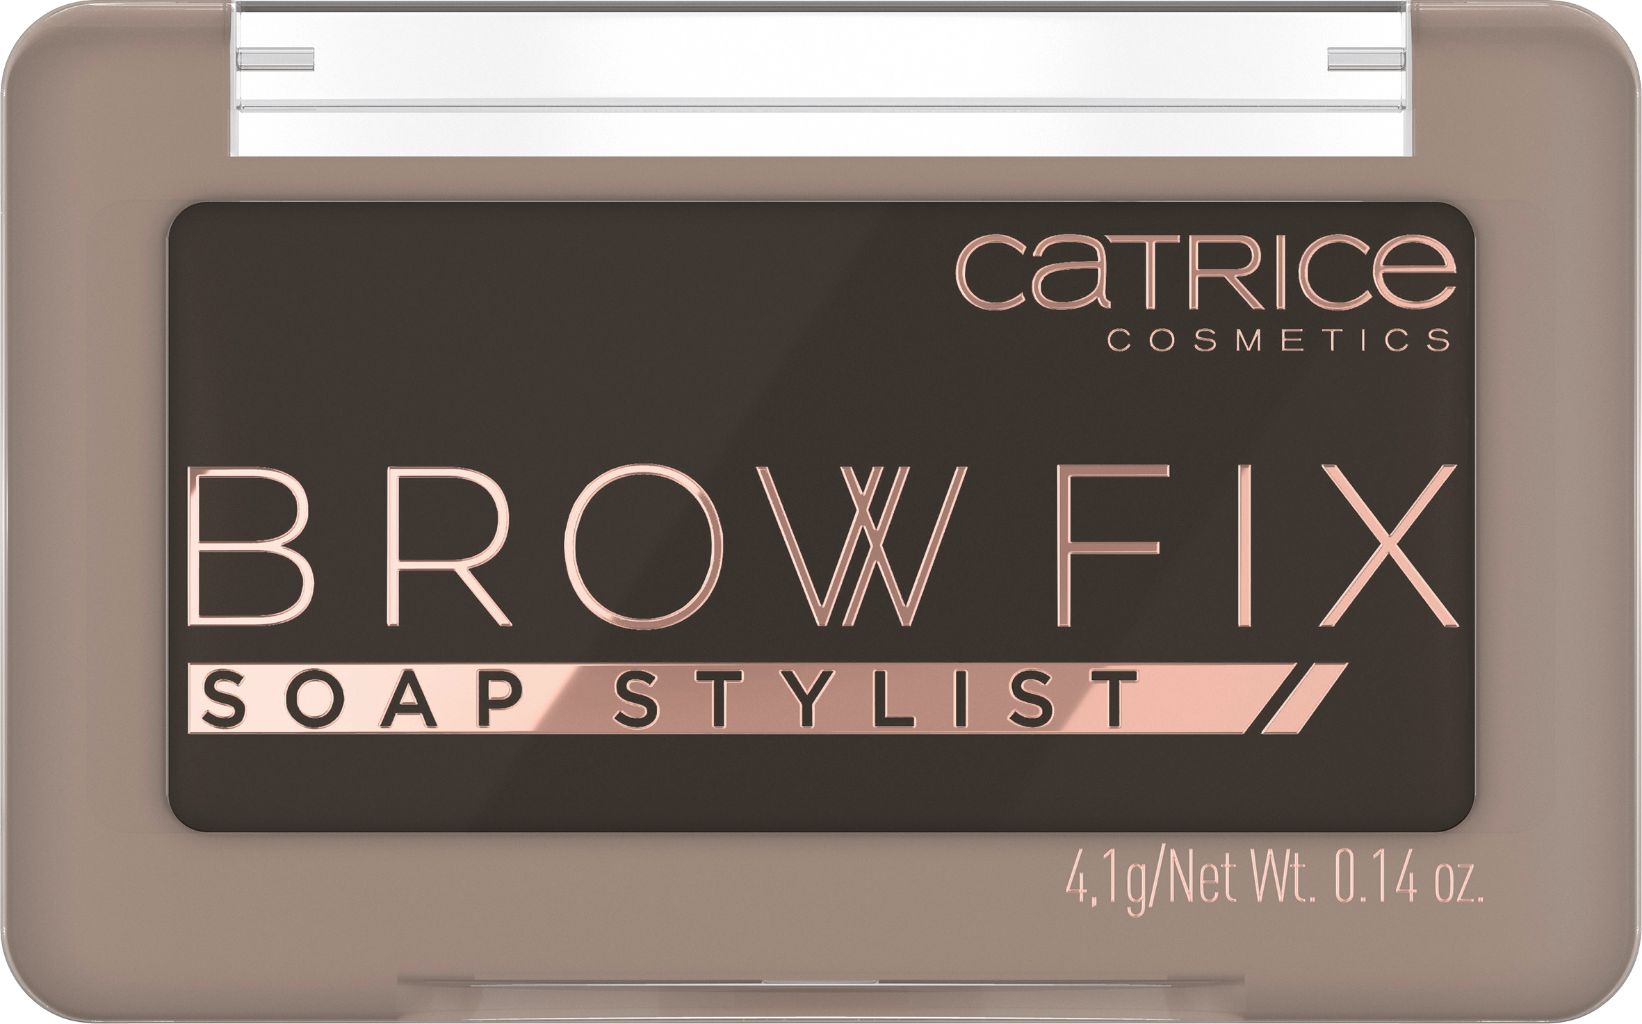 Catrice Brow Fix Soap Stylist 060 Cool Brown